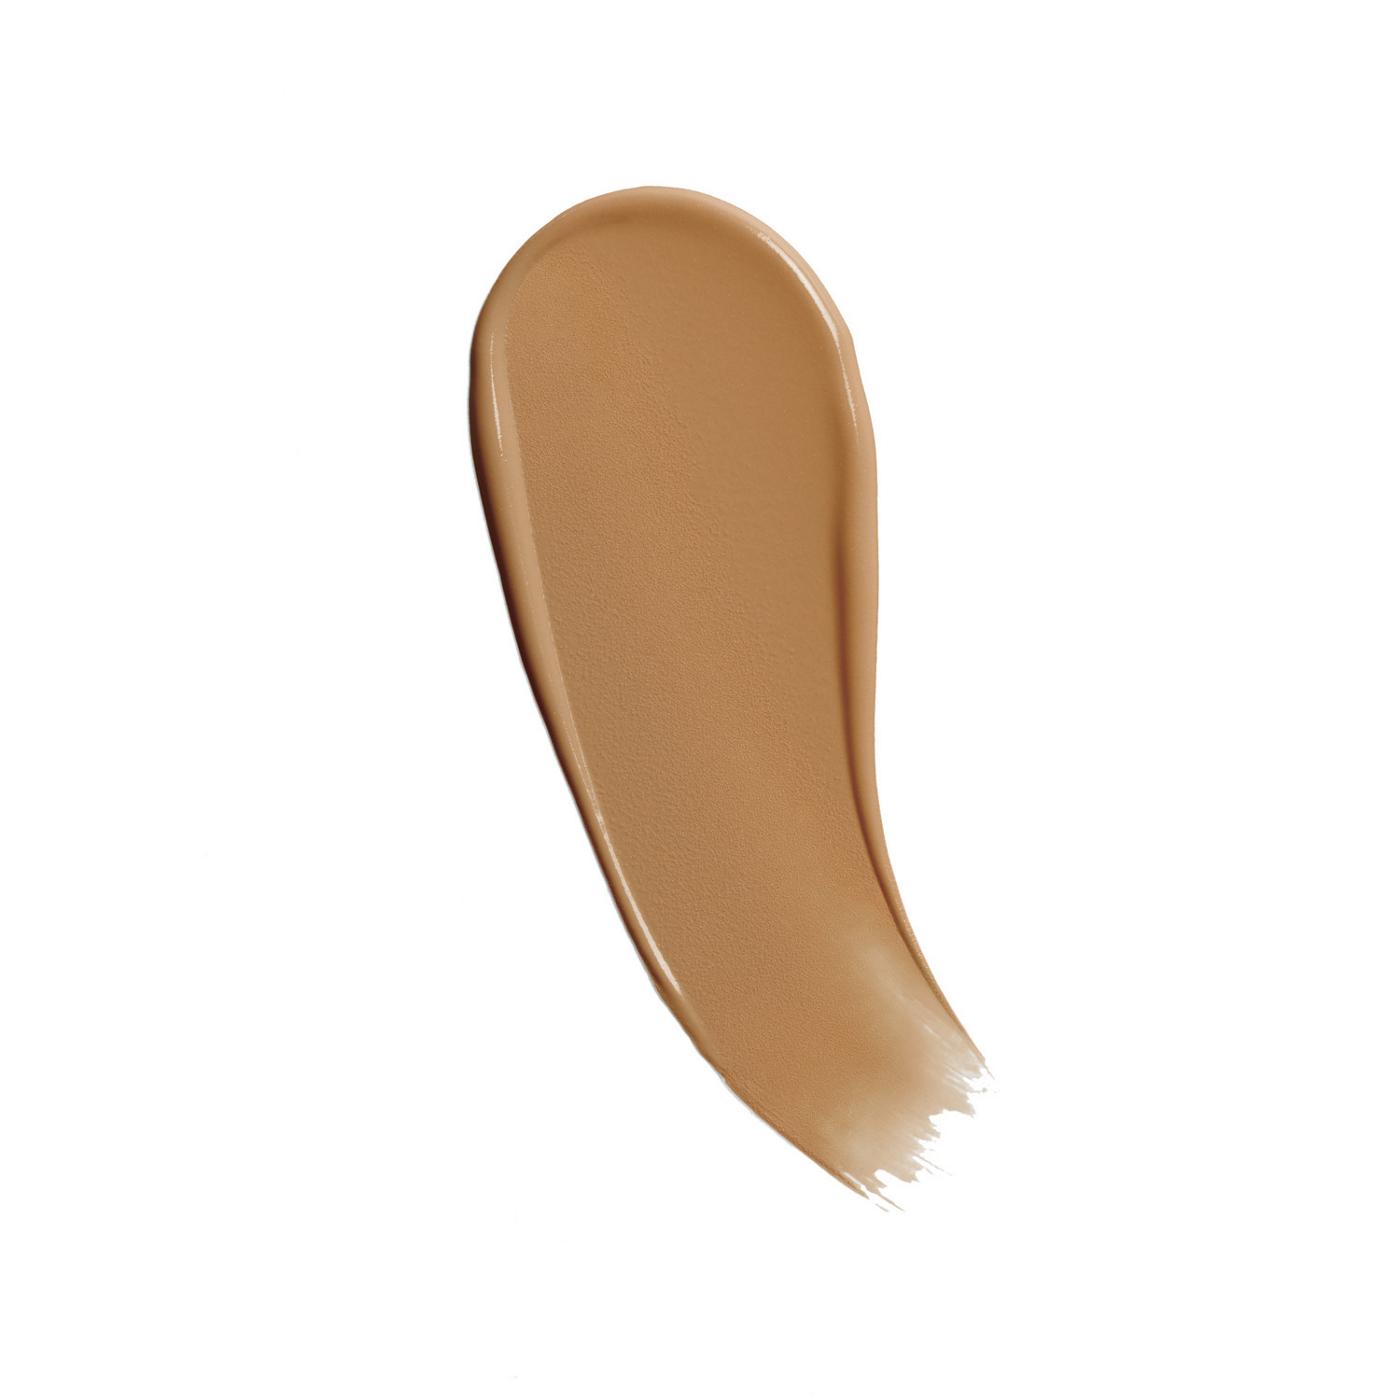 Covergirl Clean Matte BB Cream 560 Deep; image 2 of 6